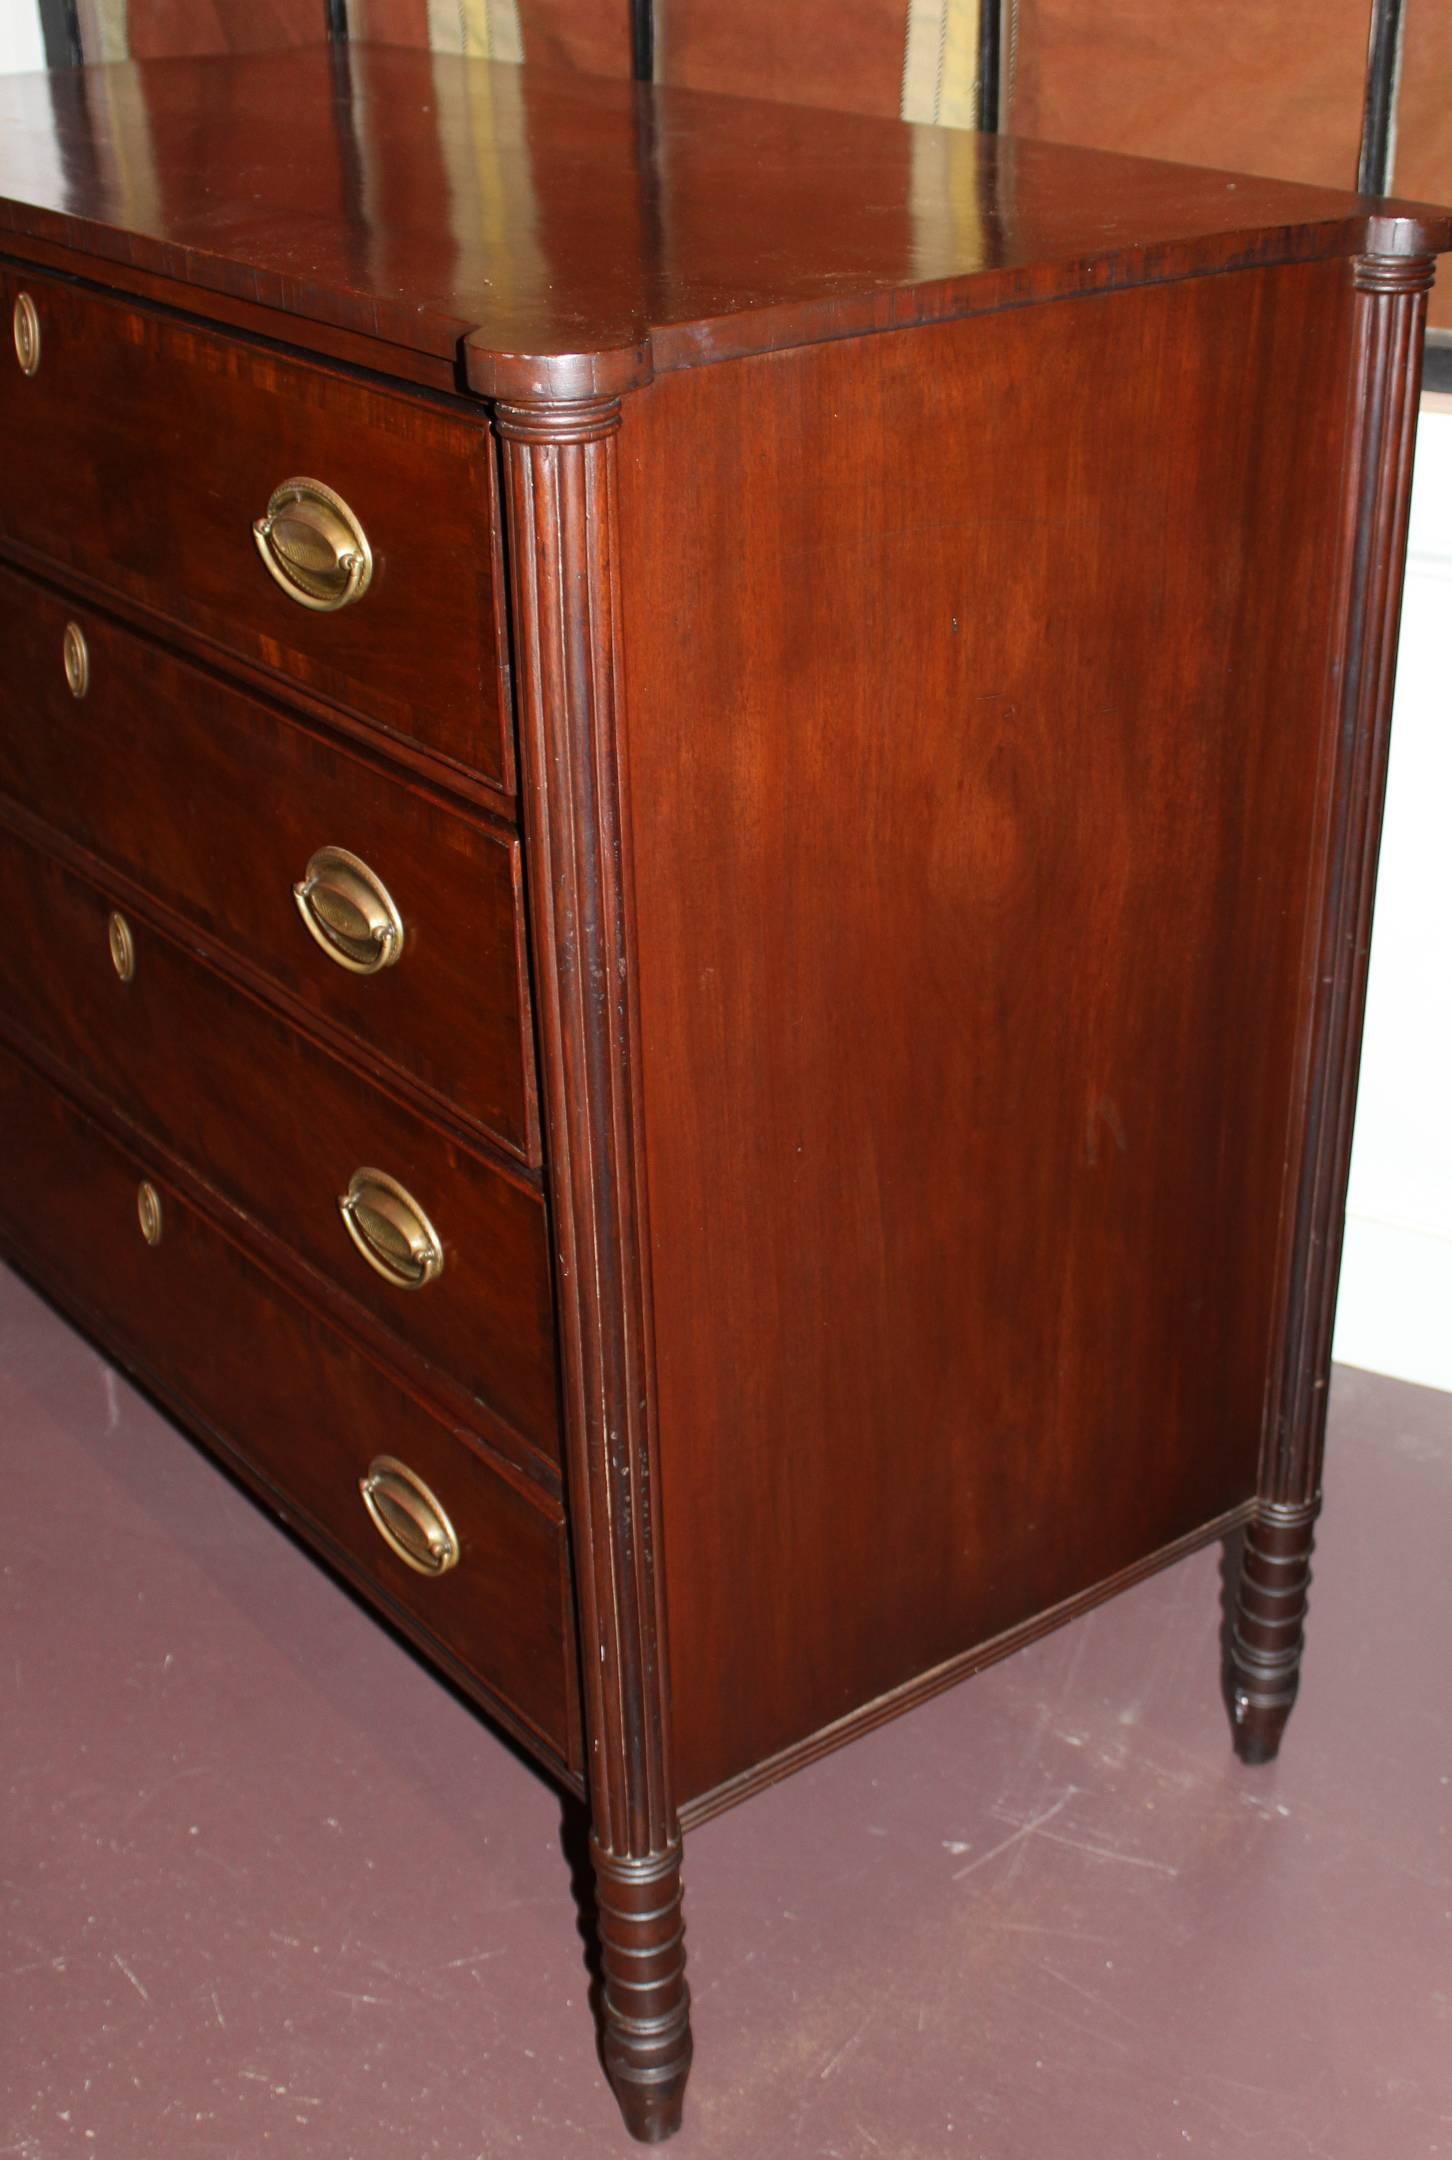 sheraton chest of drawers